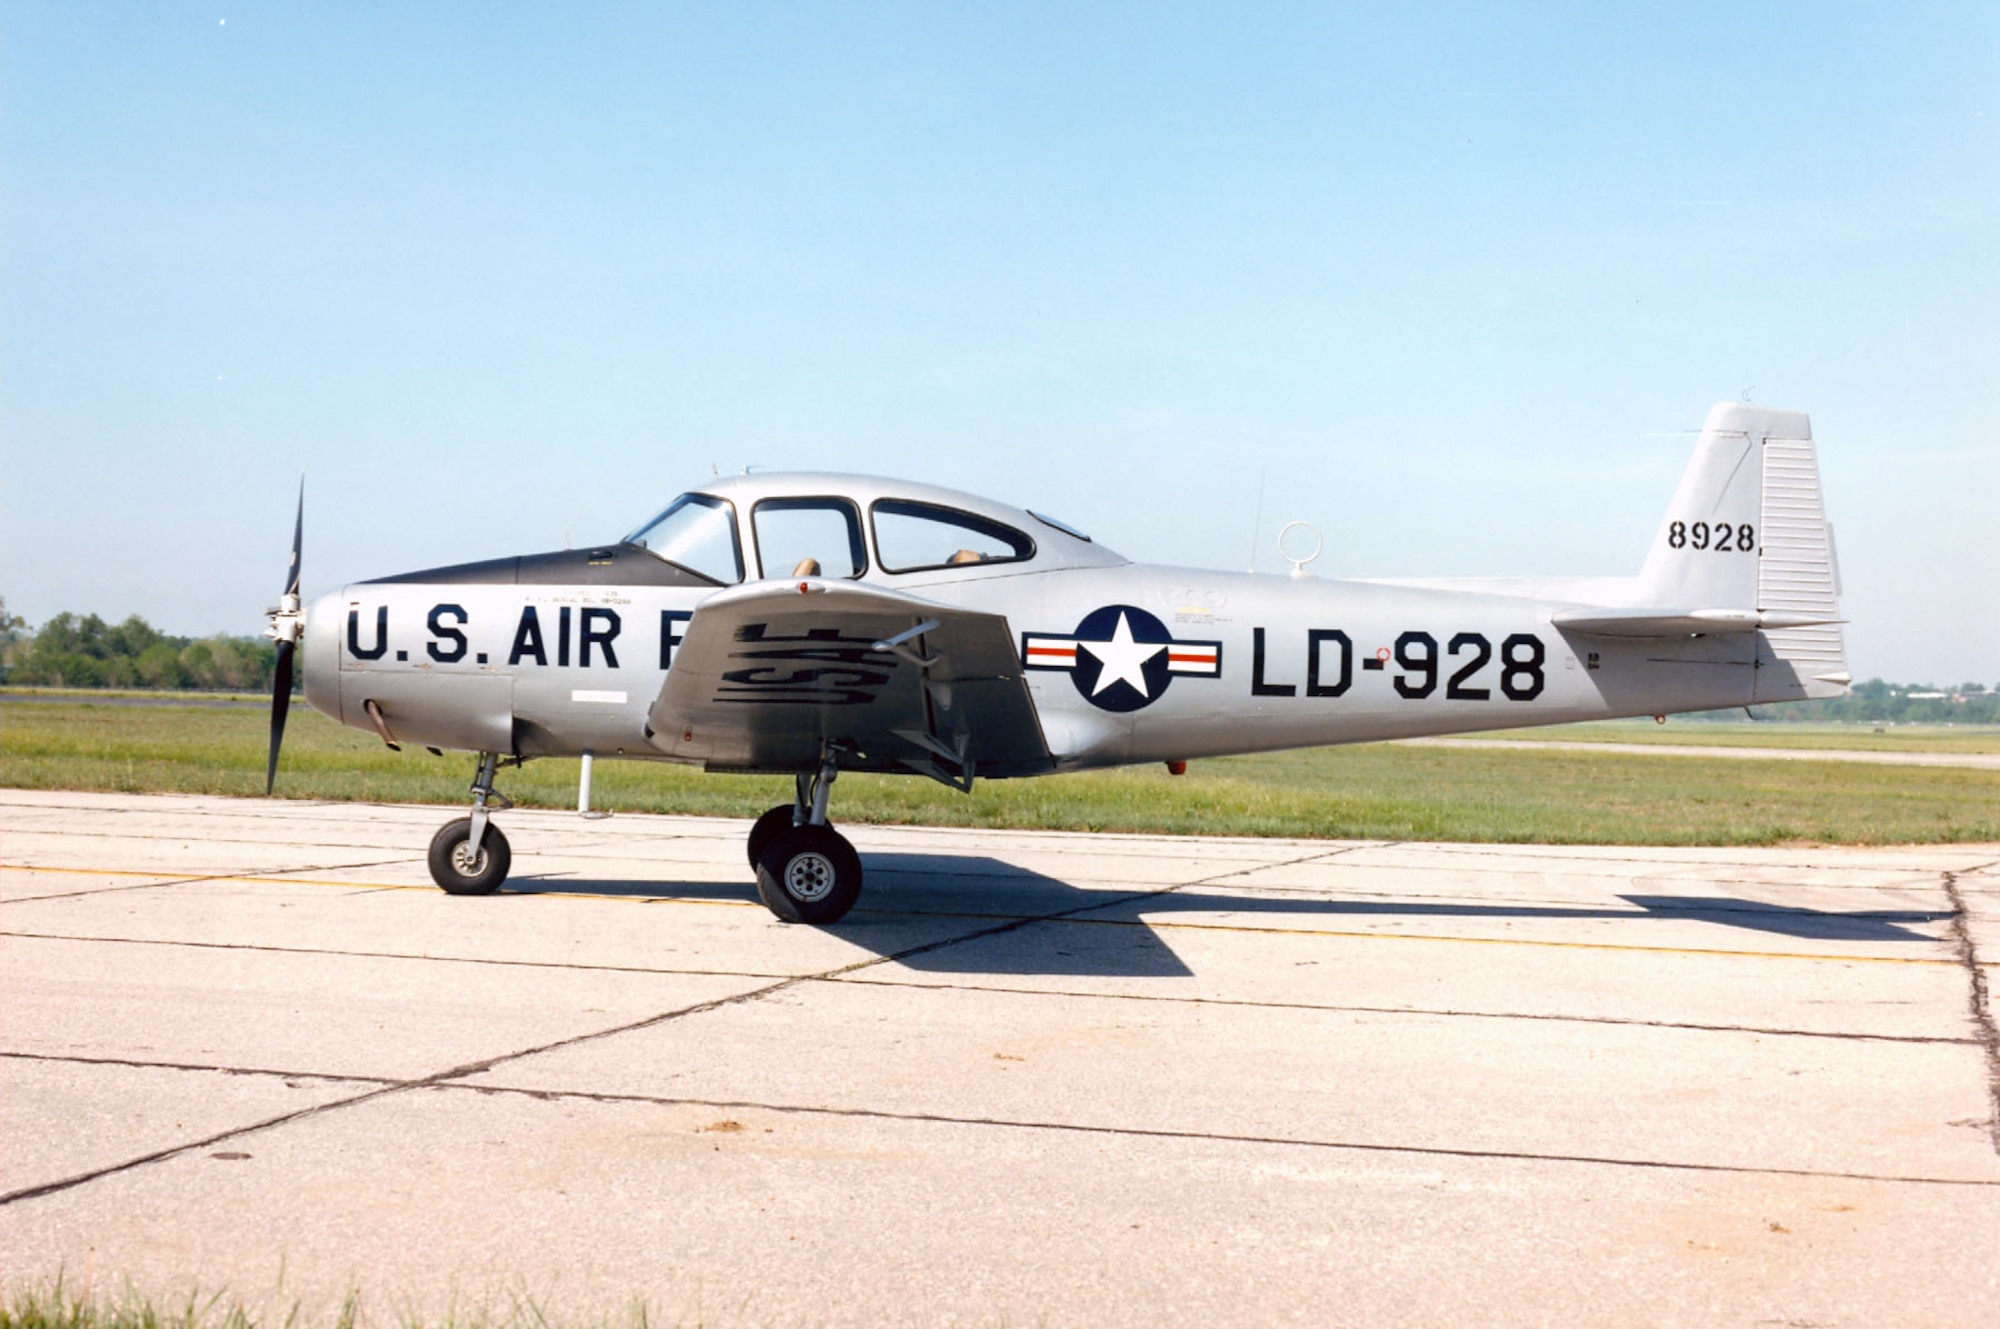 DAYTON, Ohio -- North American L-17A Navion at the National Museum of the United States Air Force. (U.S. Air Force photo)